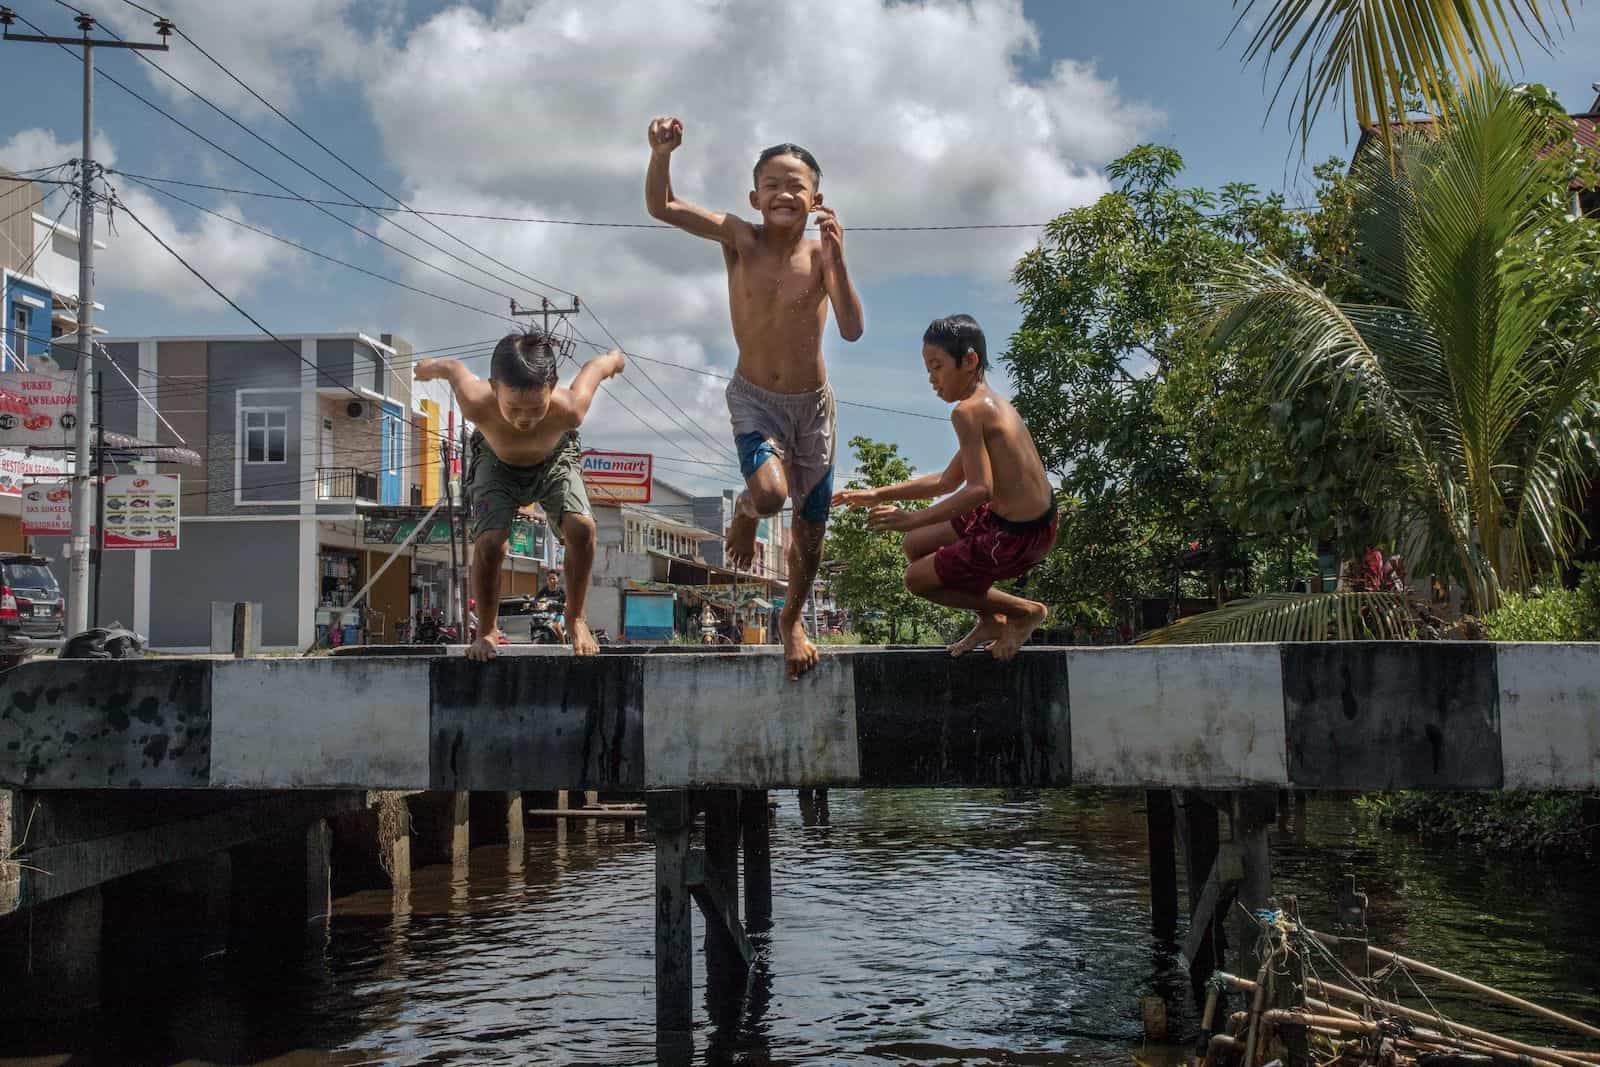 Kids Around the World: Three boys jump into a ditch next to a city block.